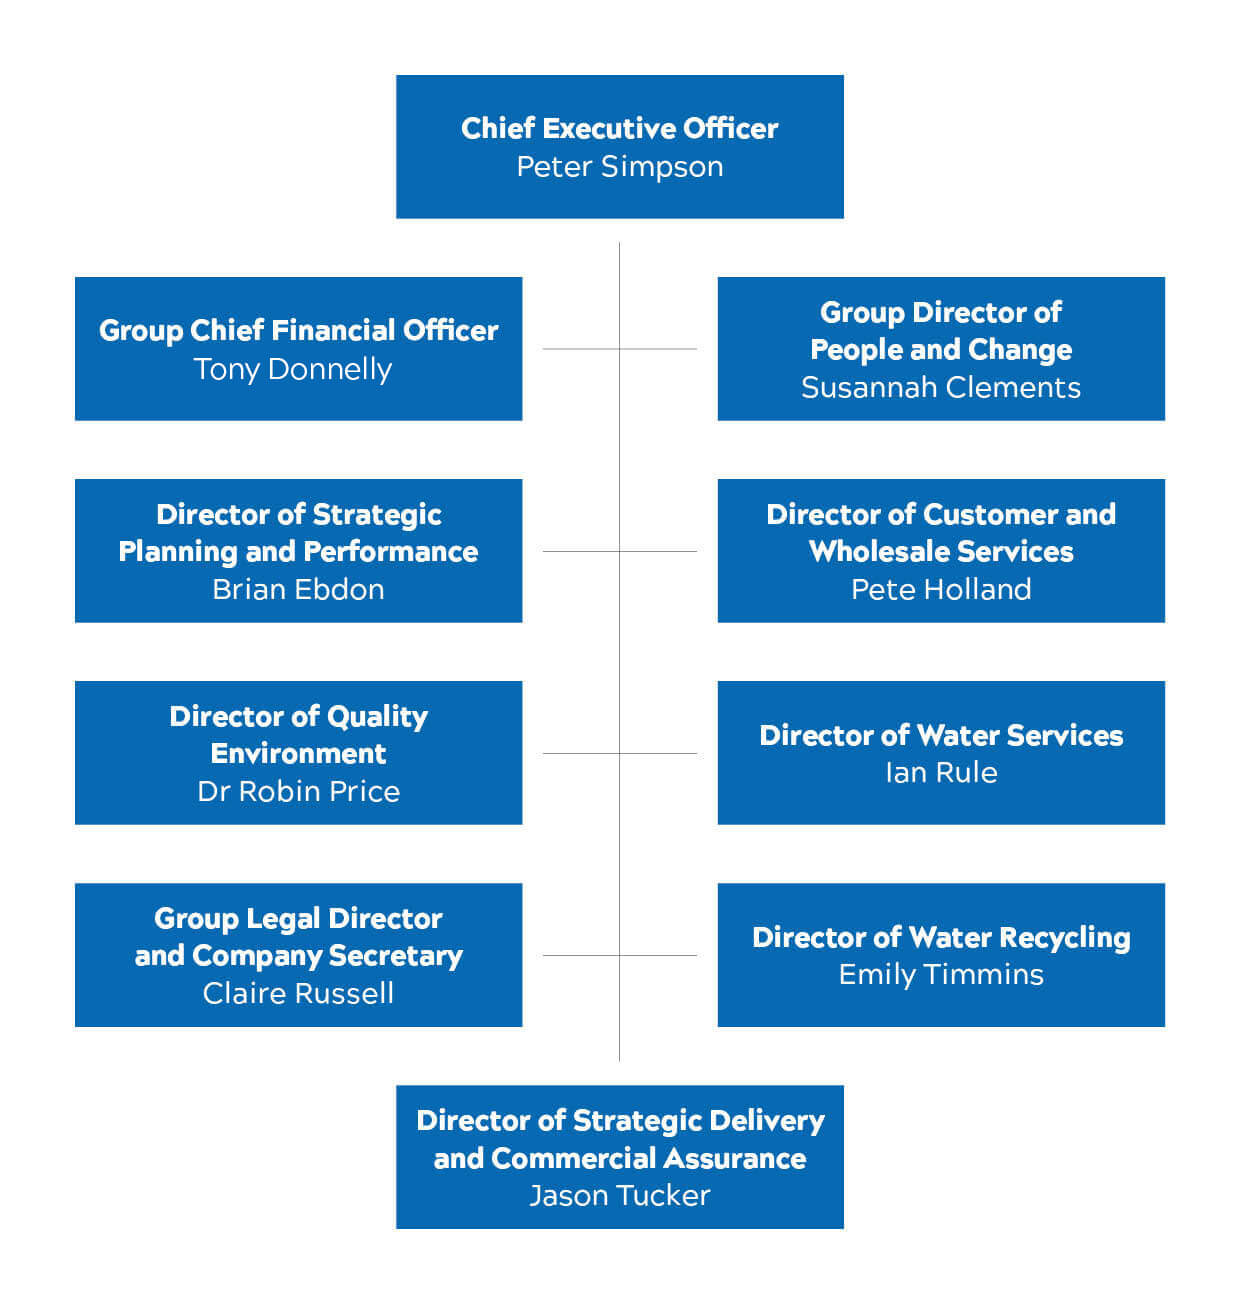 Board structure image